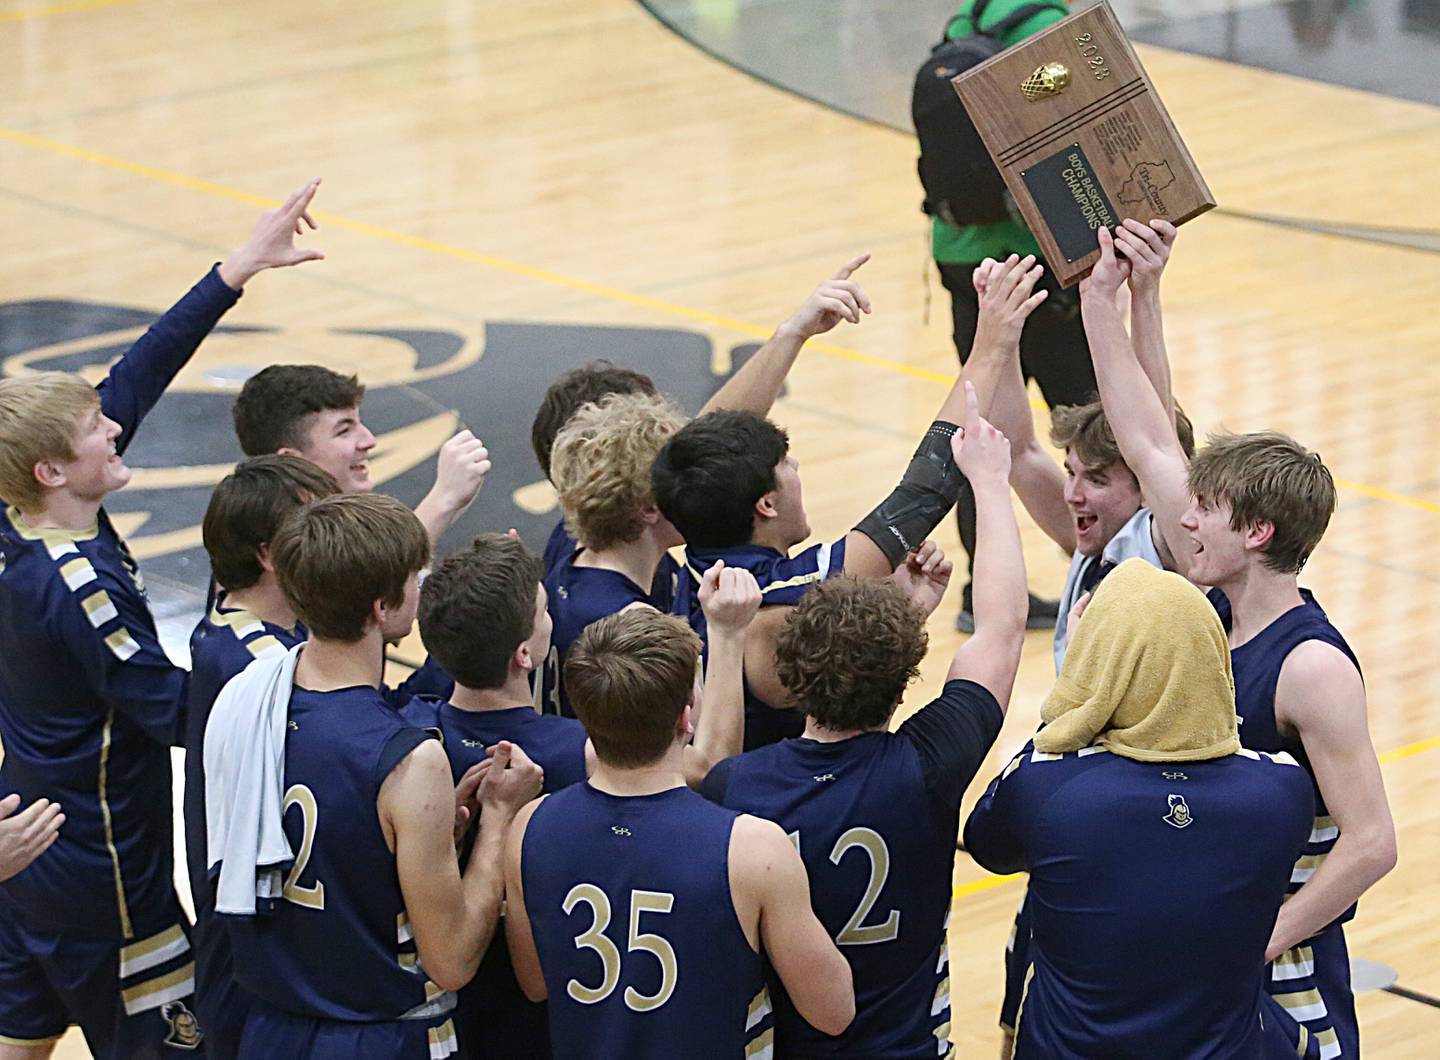 Members of the Marquette boys basketball team hoist the 2023 Tri-County championship trophy after defeating Seneca in the championship game on Friday, Jan. 27, 2023 at Putnam County High School.